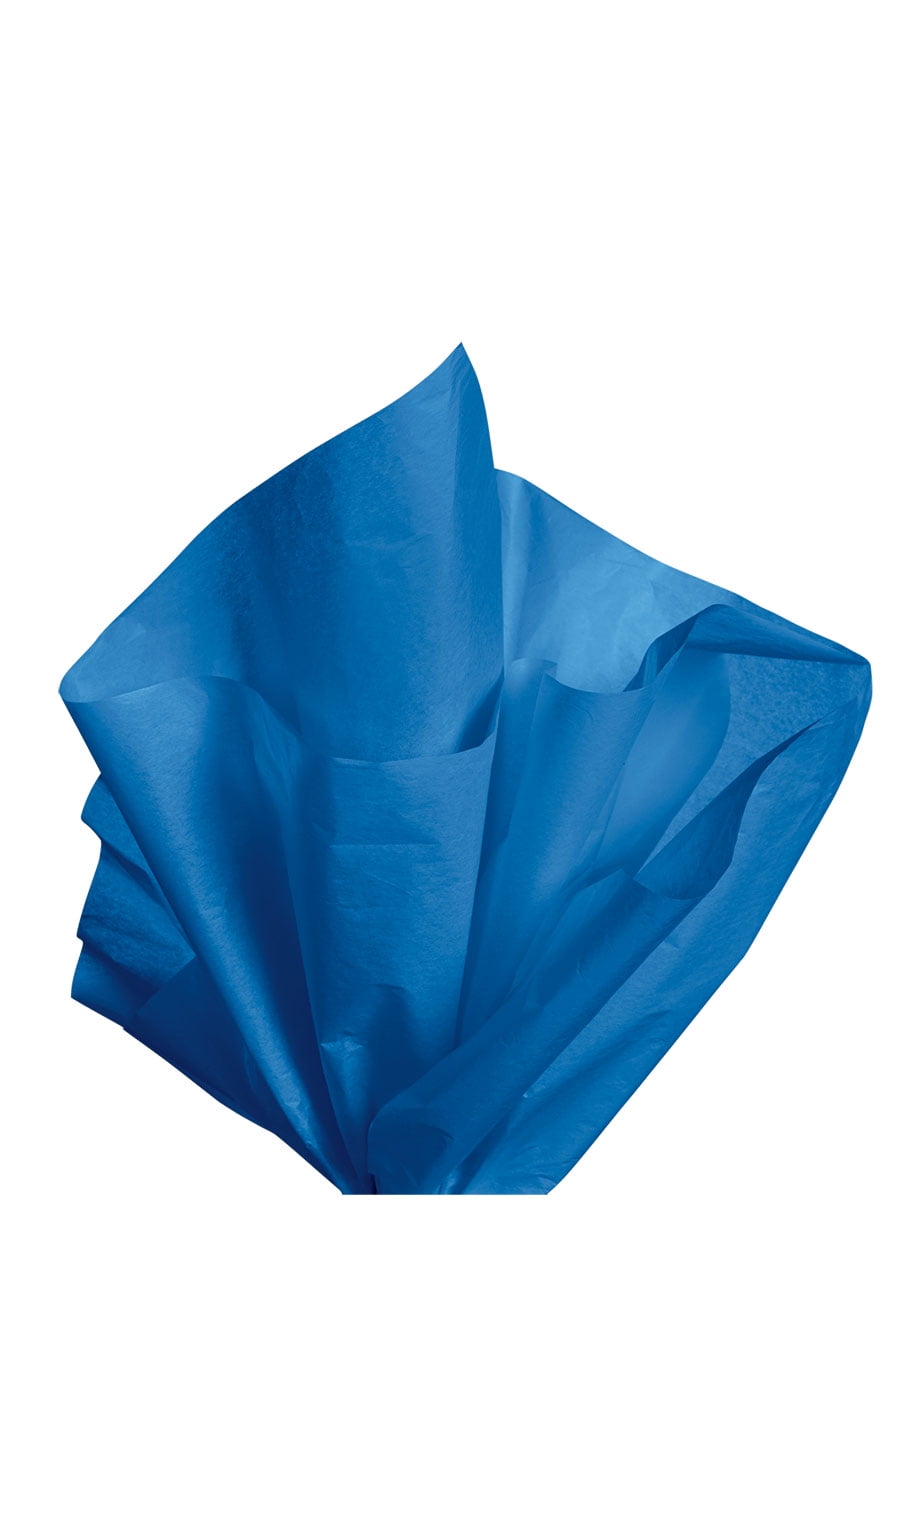 20 x 30 inch Royal Blue Tissue Paper